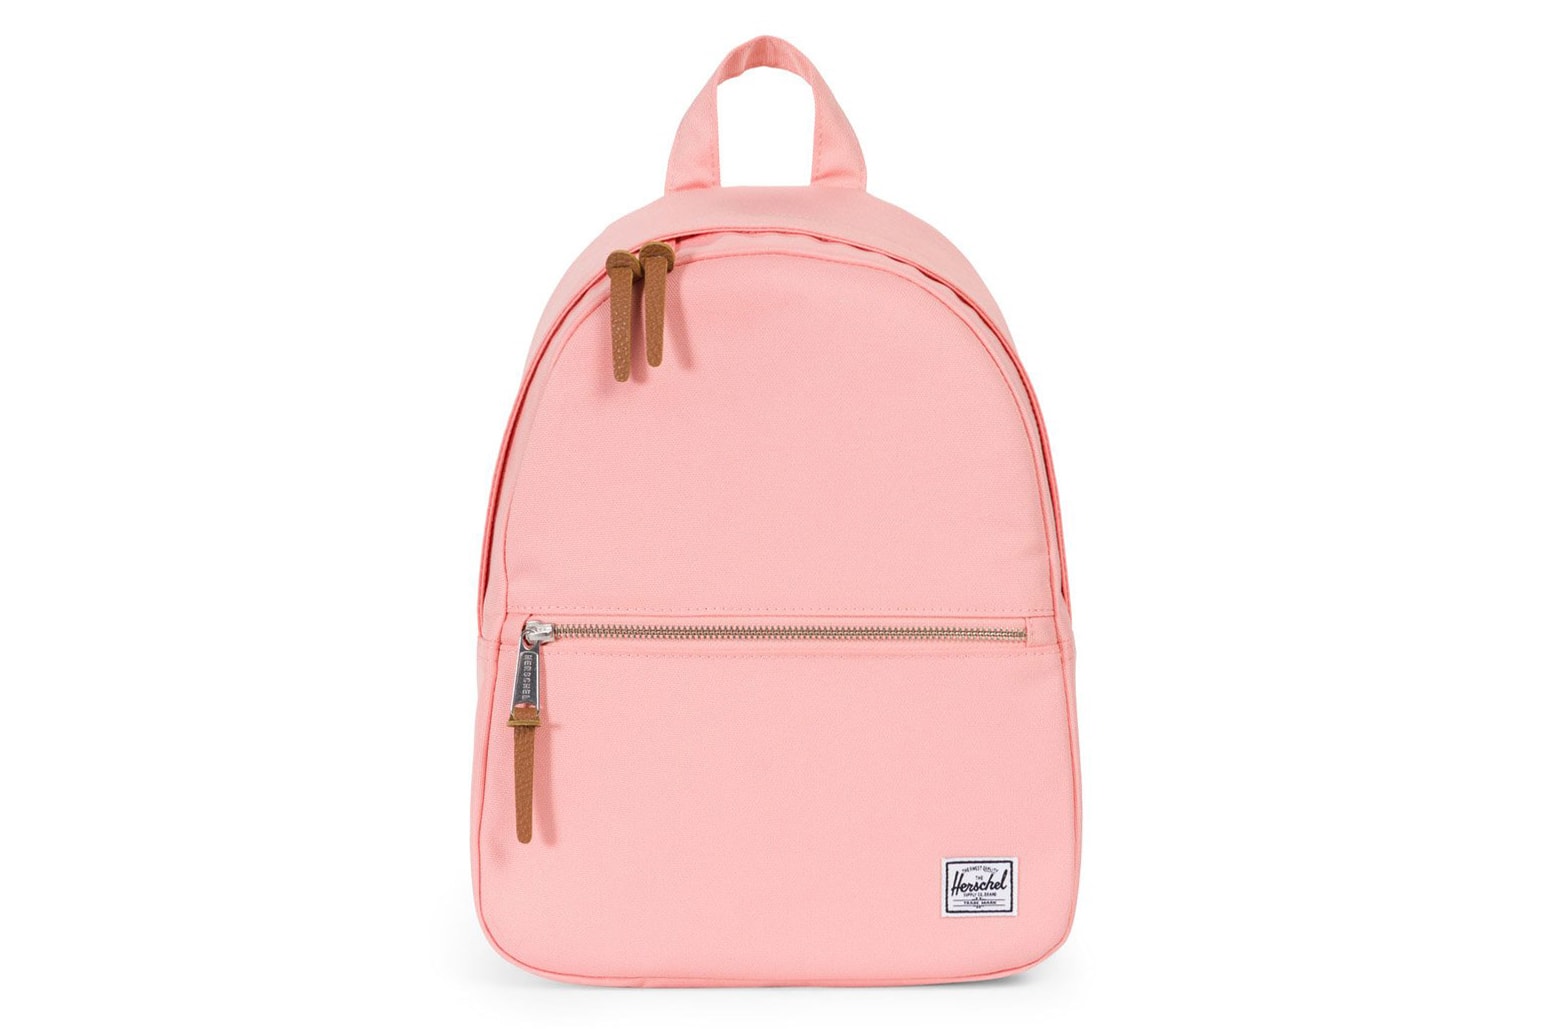 Herschel Supply Town Backpack in Peach Tan Hydrangea Pastel Lilac Blue Purple Pink Bag Shop Price Release Where to Buy Spring Summer 2018